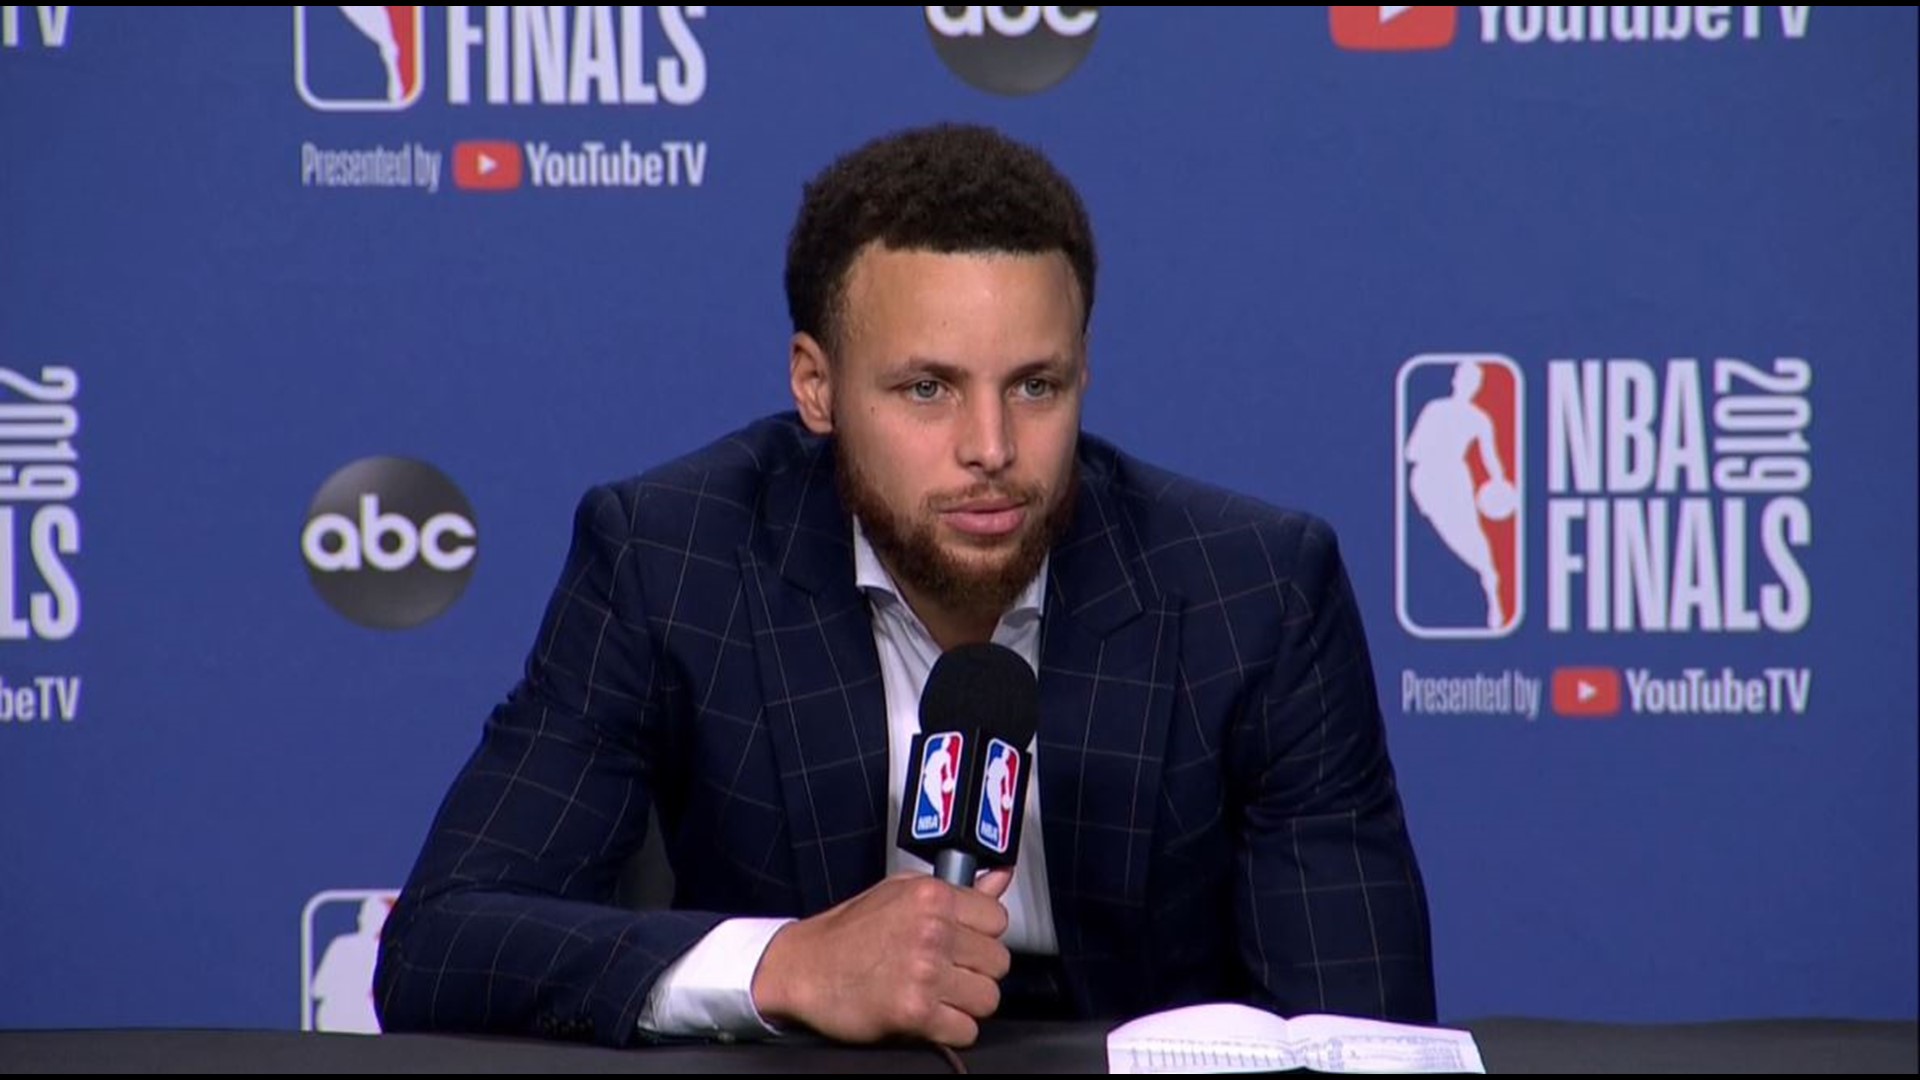 Warriors point guard Stephen Curry talks about losing Kevin Durant to an Achilles injury, but his team still being able to squeak out a win over the Raptors in Game 5 on Monday in Toronto, to force a Game 6 back in Oakland on Thursday, trailing 3-2 in the NBA Finals.